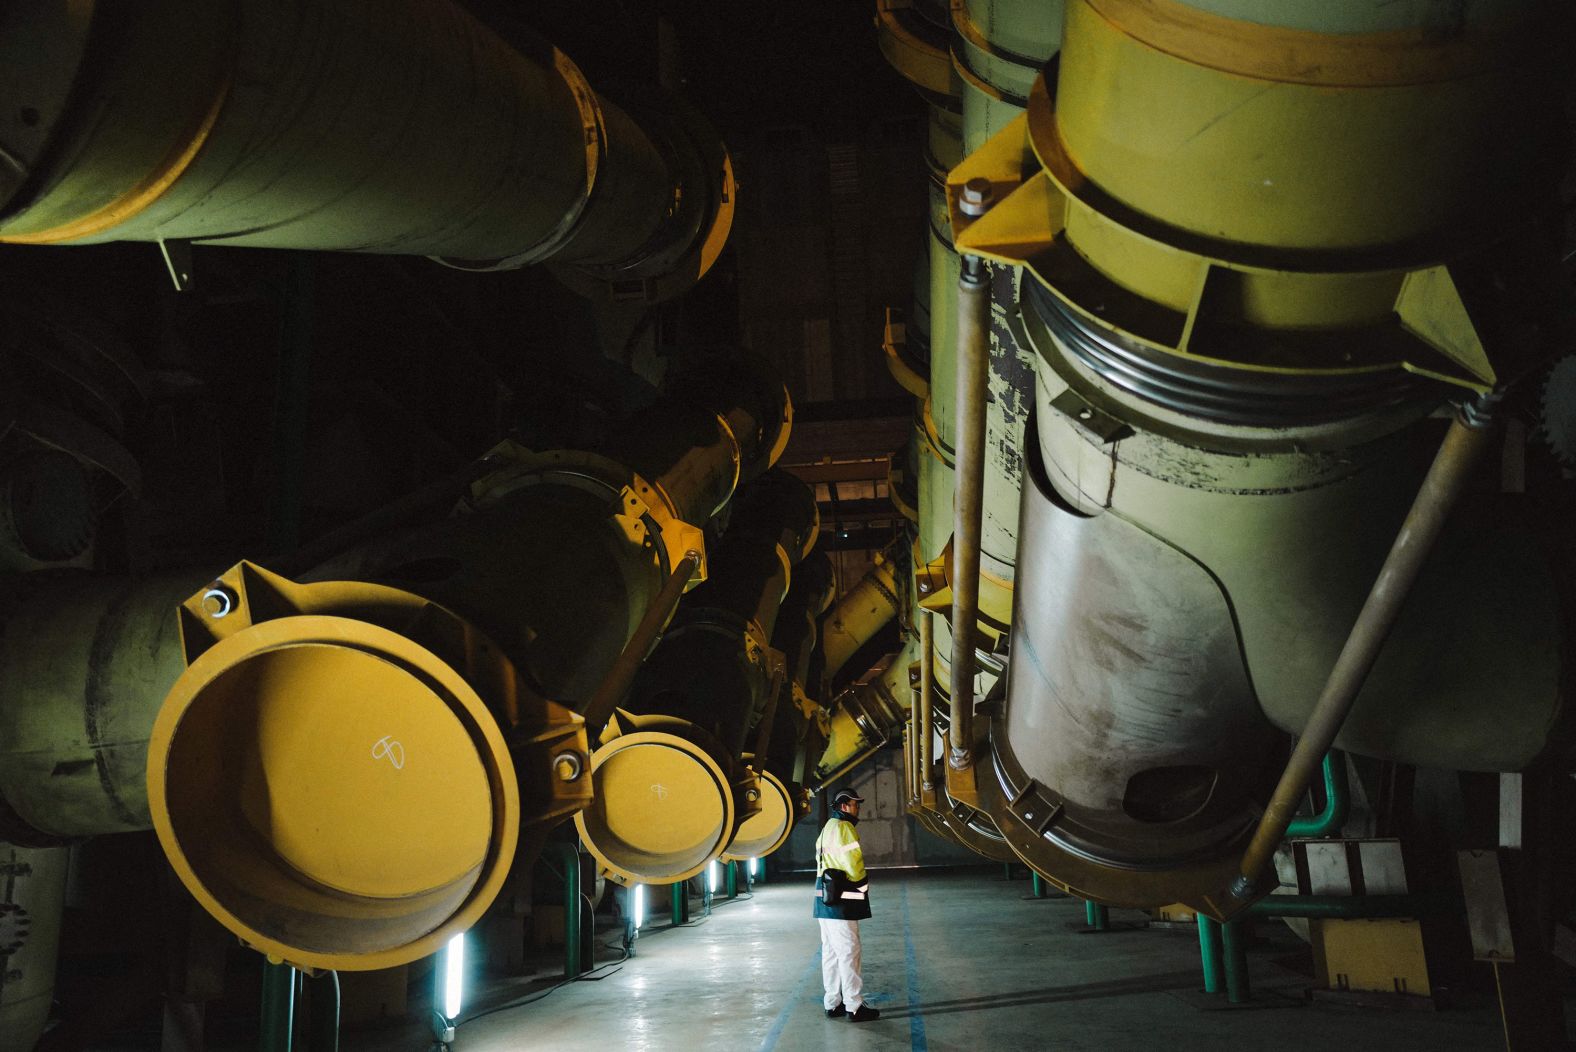 An employee stands in the manufacturing workshop Georges Besse 1, a uranium enrichment site at a nuclear power plant in Saint-Paul-Trois-Châteaux, France, on Thursday, January 26.